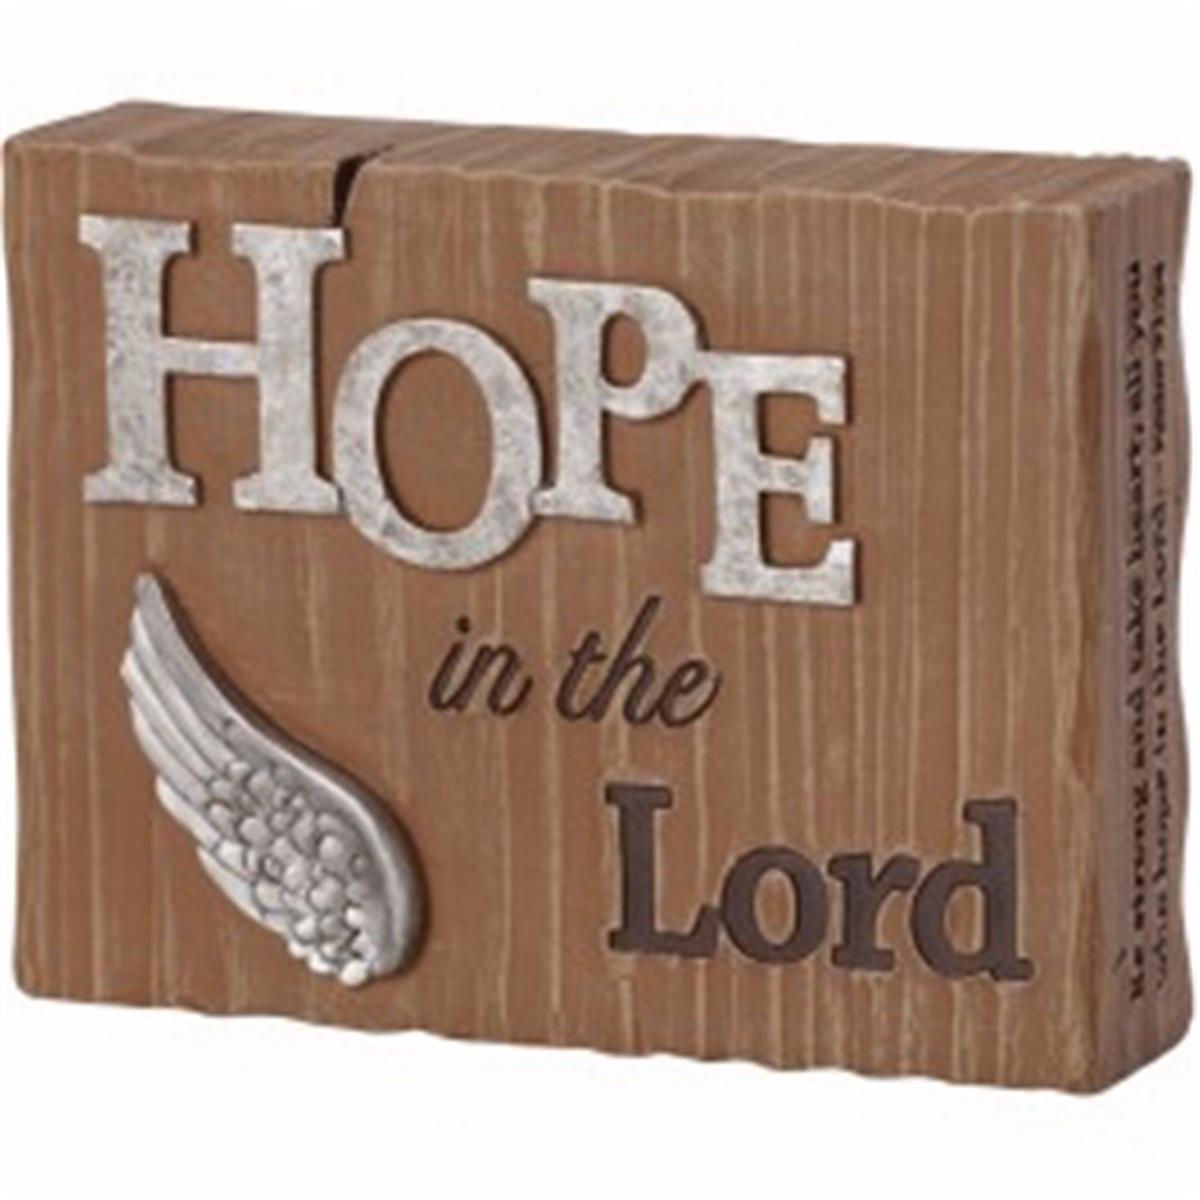 199164 Hope - Tabletop Plaque, 3 X 4.25 X 1.25 In.